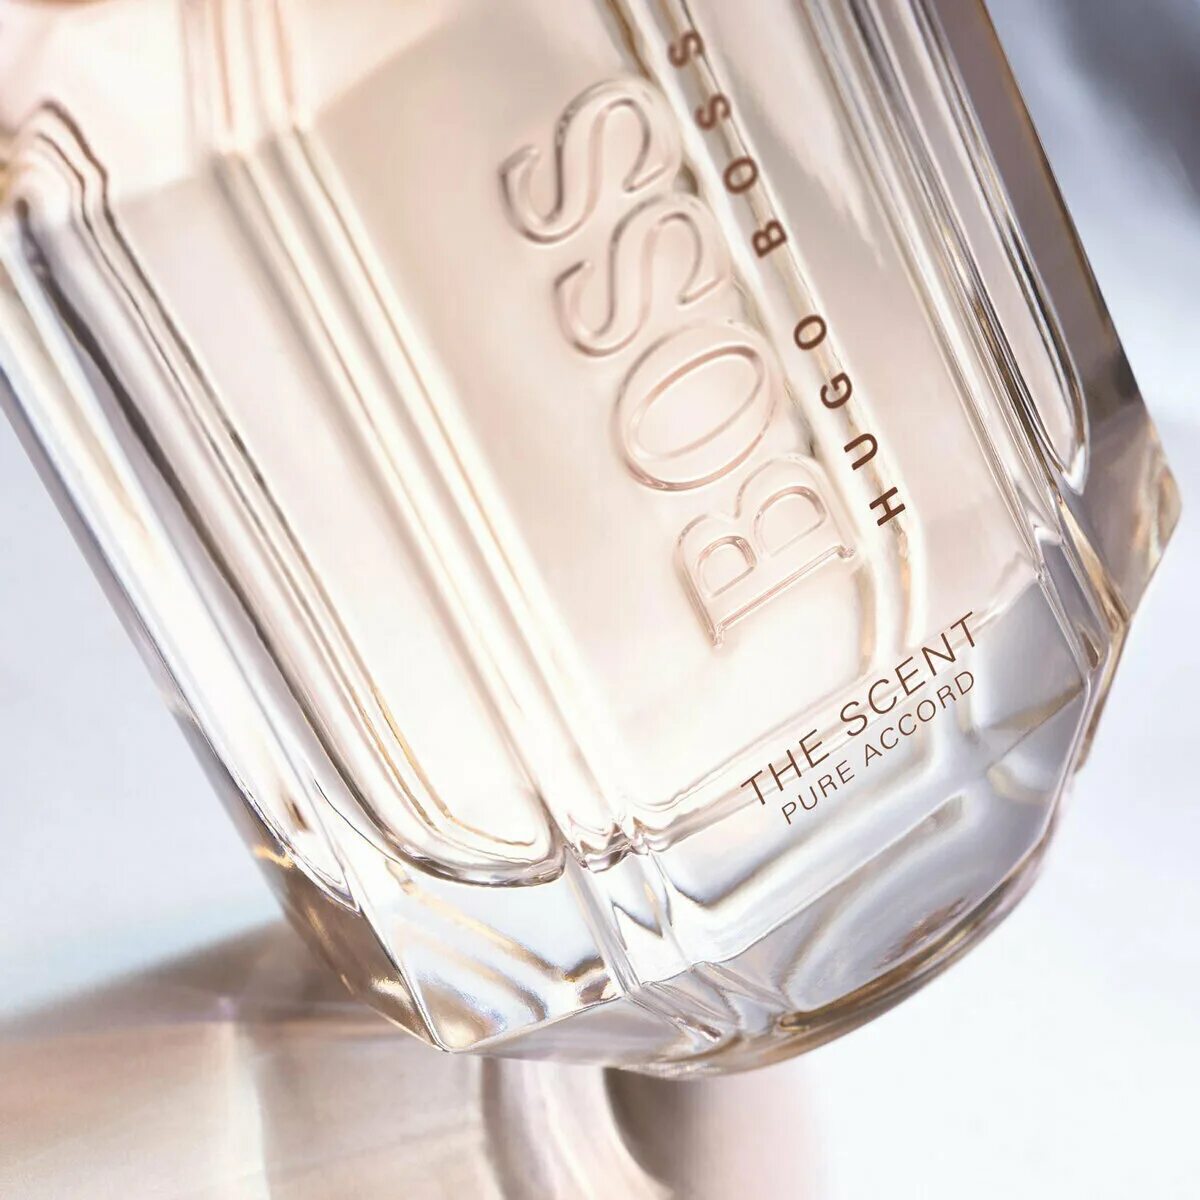 Hugo Boss the Scent Pure Accord for her. Boss the Scent Pure Accord женский. Hugo Boss the Scent Pure Accord. Hugo Boss "the Scent Pure Accord" 100 ml.